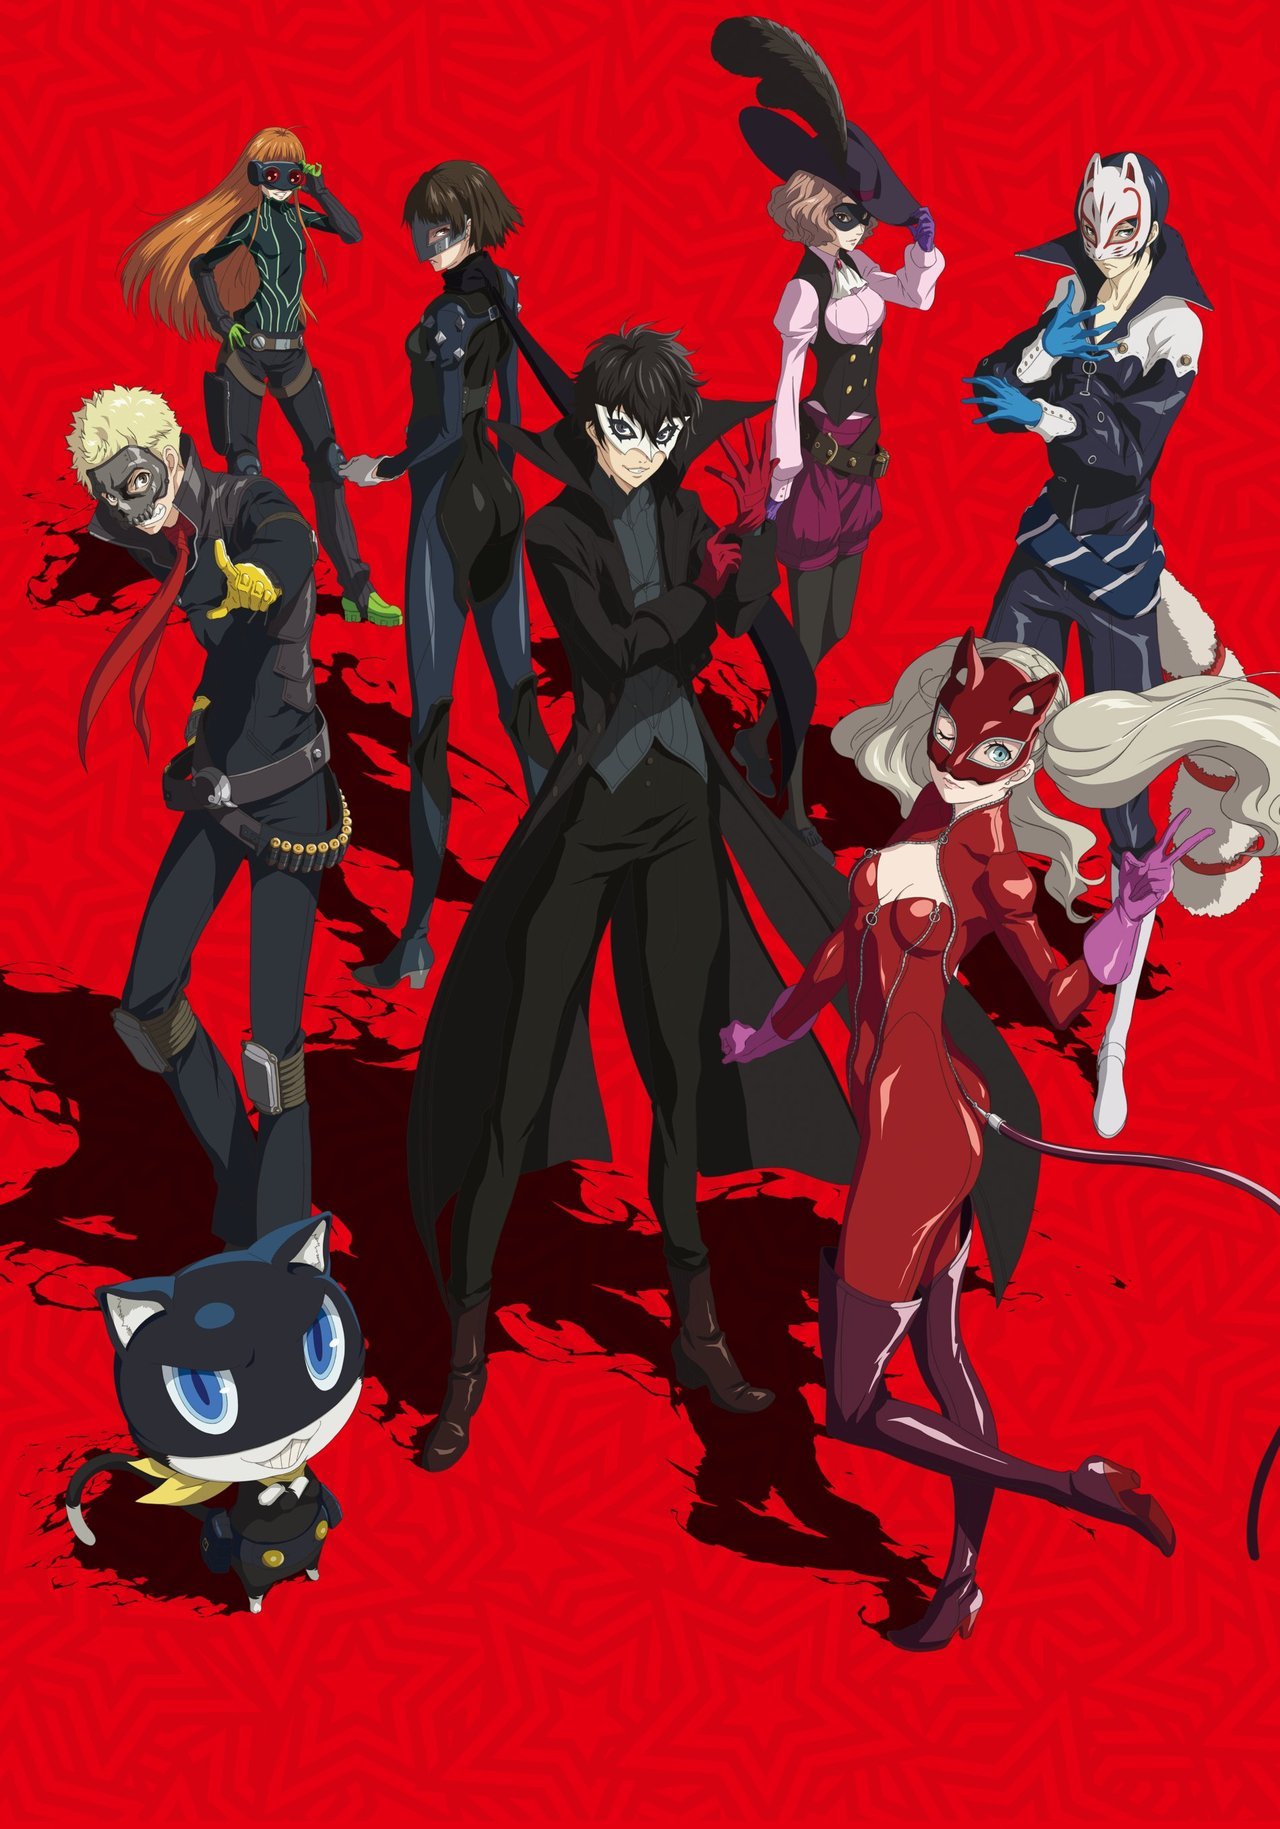 New 2nd-cour key visual for âPersona 5 the Animationâ has been unveiled.